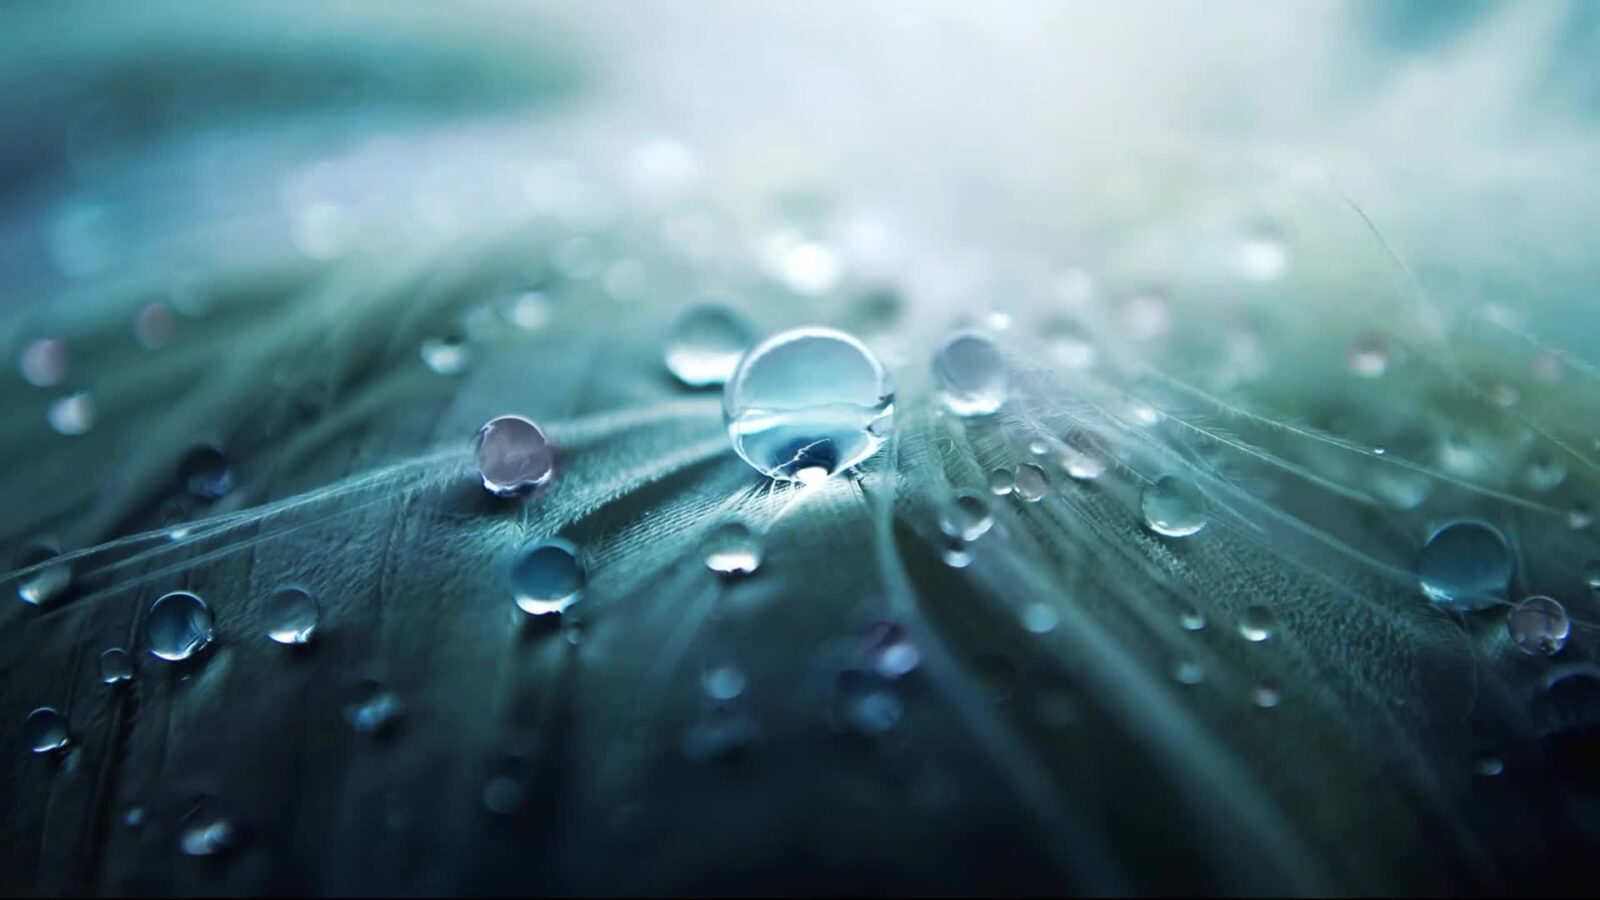 LiveWallpapers4Free.com | Awesome Crystal Water Drops Leaf - Animated Desktop Wallpaper